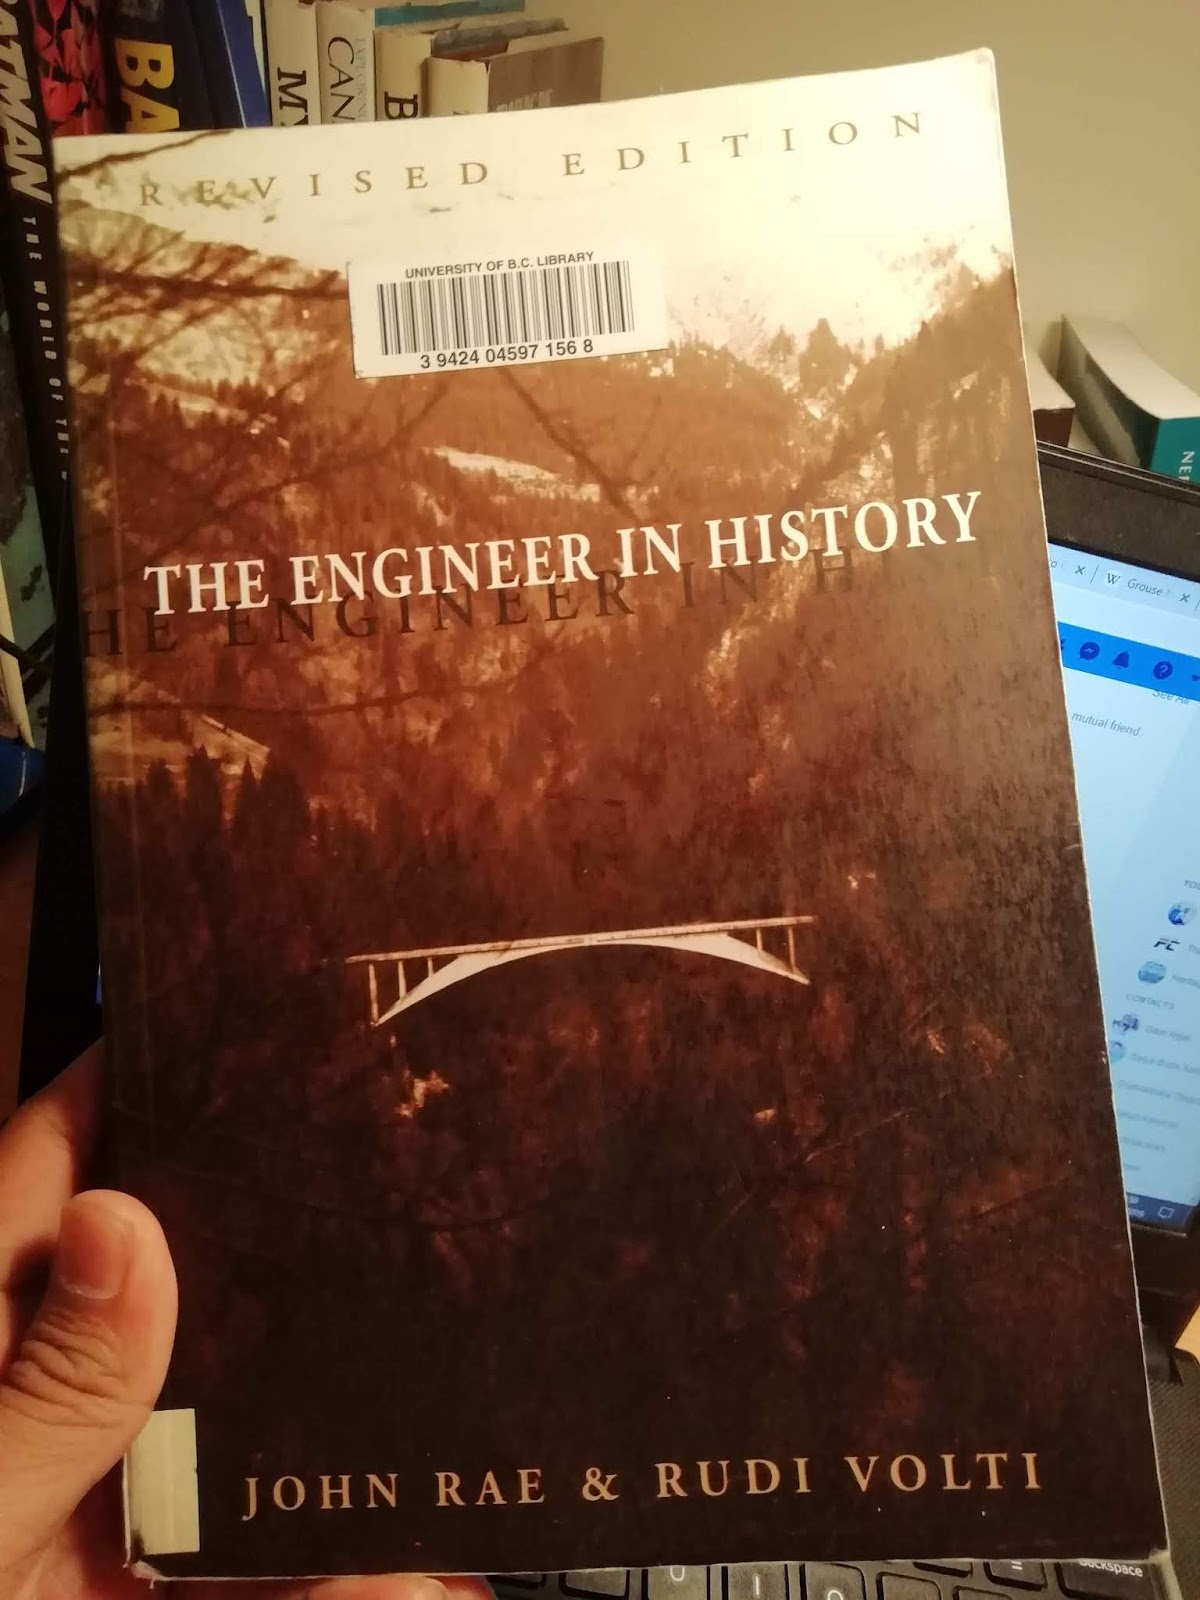 Book Post 8: “The Engineer in History” by John Rae & Rudi Volti